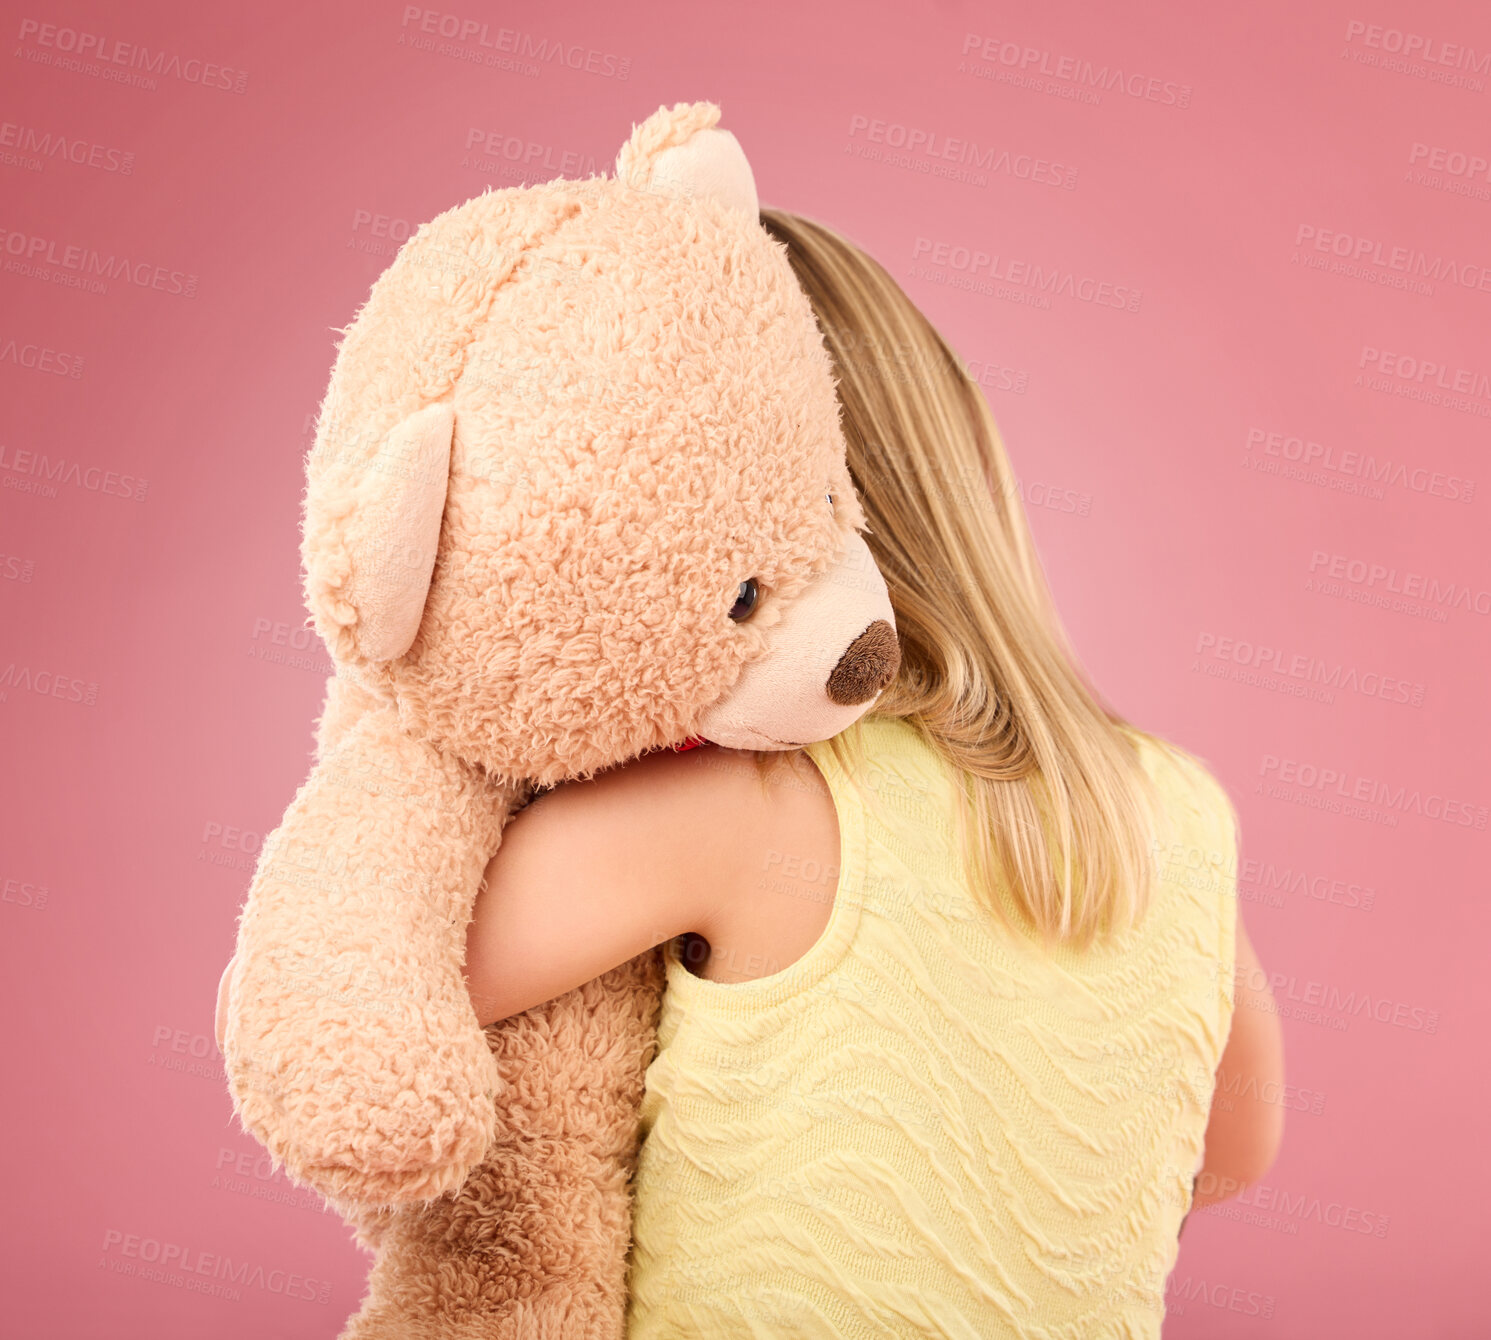 Buy stock photo Teddy bear, love and back of a girl in a studio with a big, fluffy and cute toy as a gift or present. Adorable, innocent and young child hugging her teddy with care and happiness by a pink background